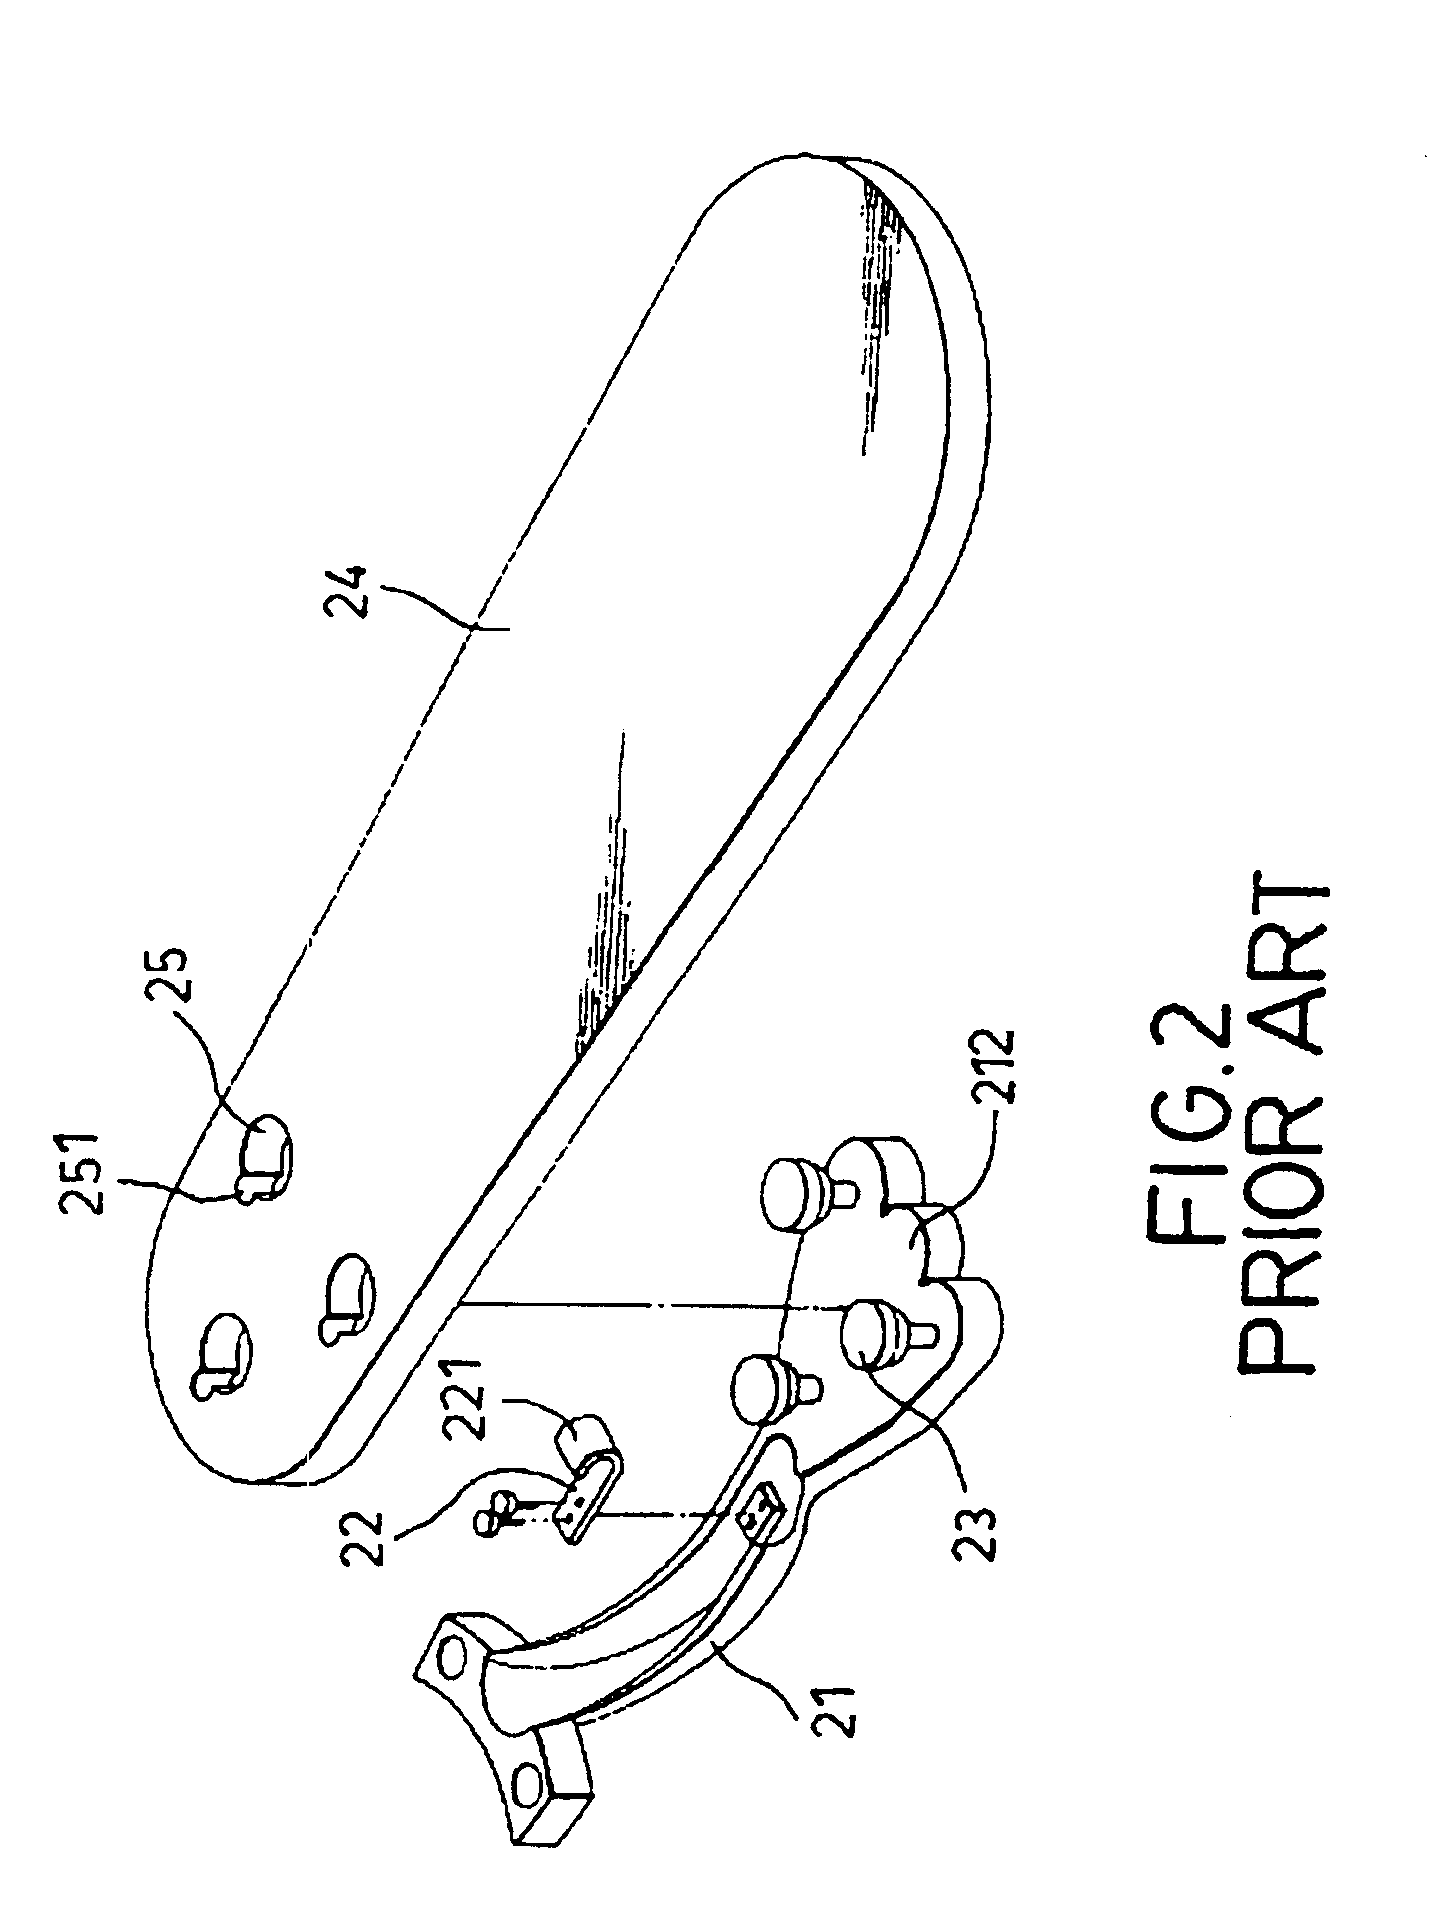 Connecting device for connecting a fan blade to a rotor of a motor of a ceiling fan